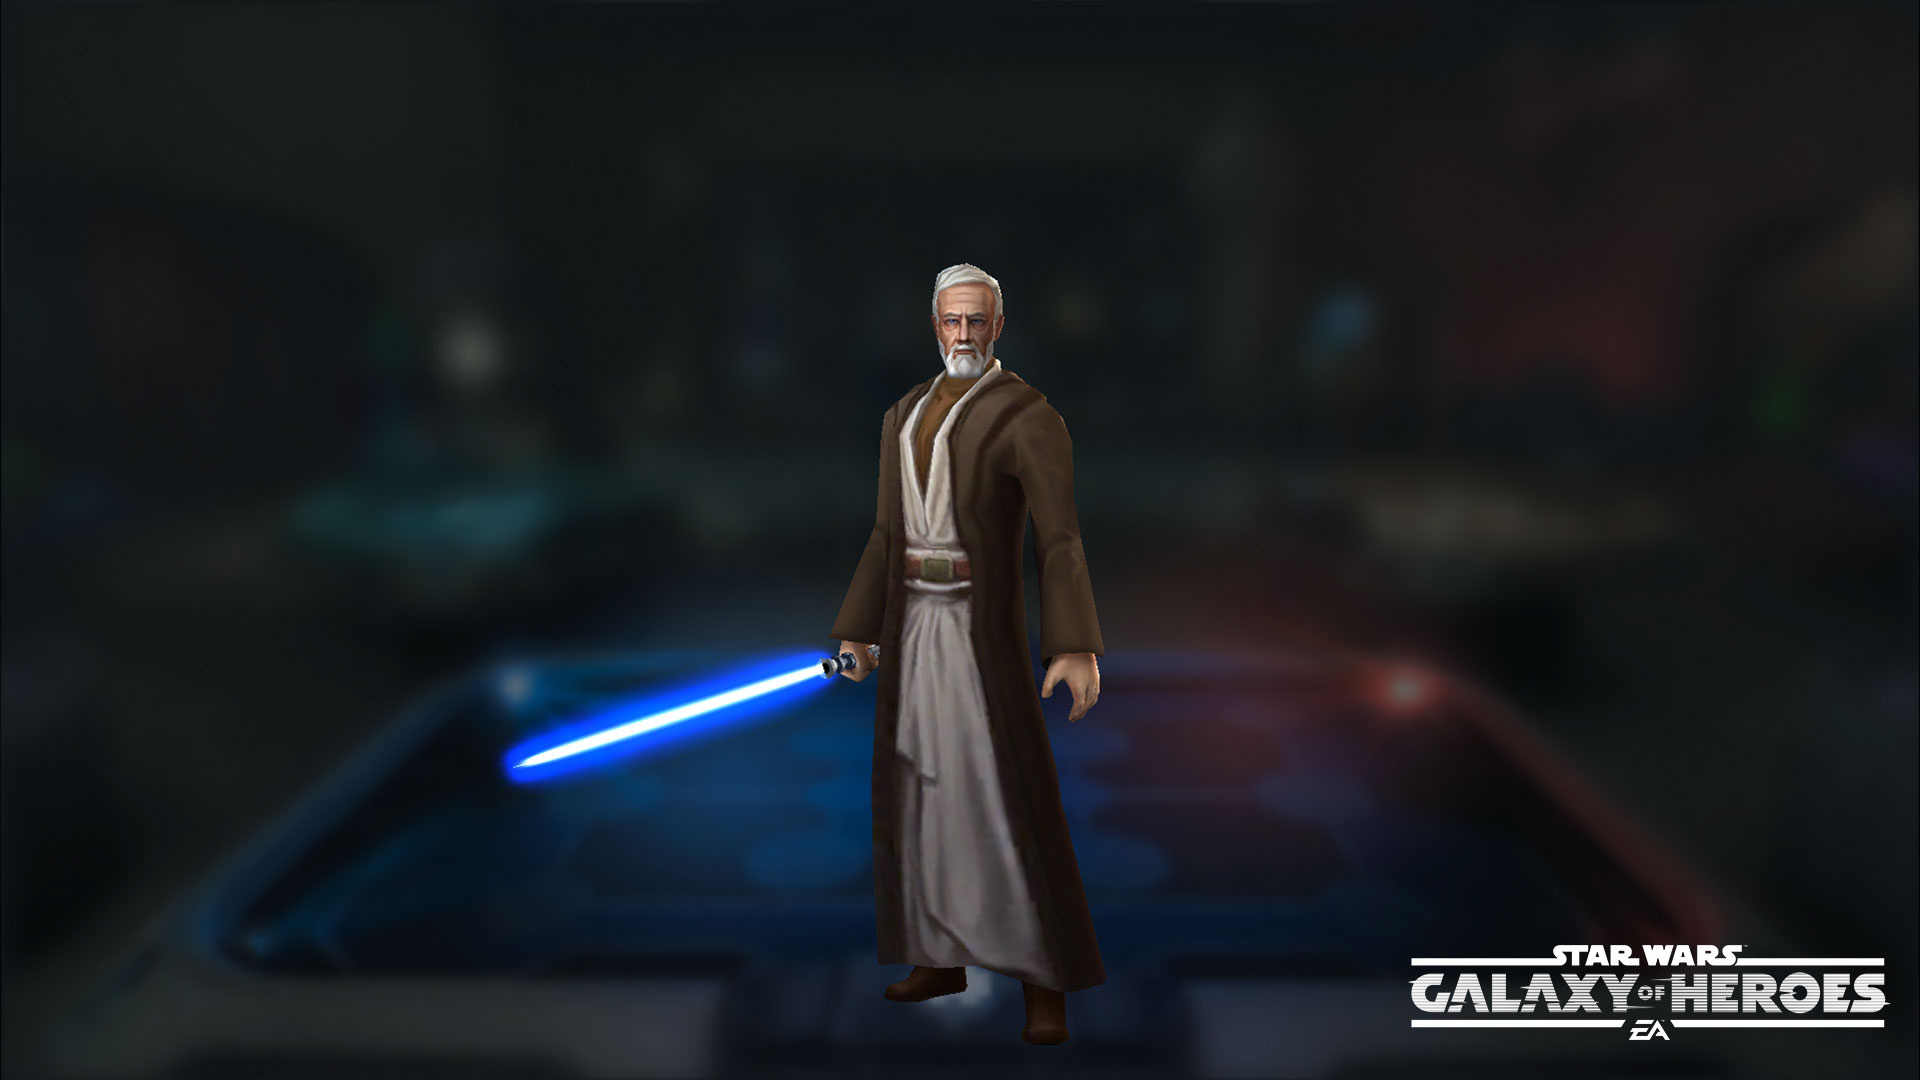 Star Wars: Galaxy of Heroes: Jedi Master, Obi-Wan Kenobi, A free-to-play mobile role-playing game. 1920x1080 Full HD Background.